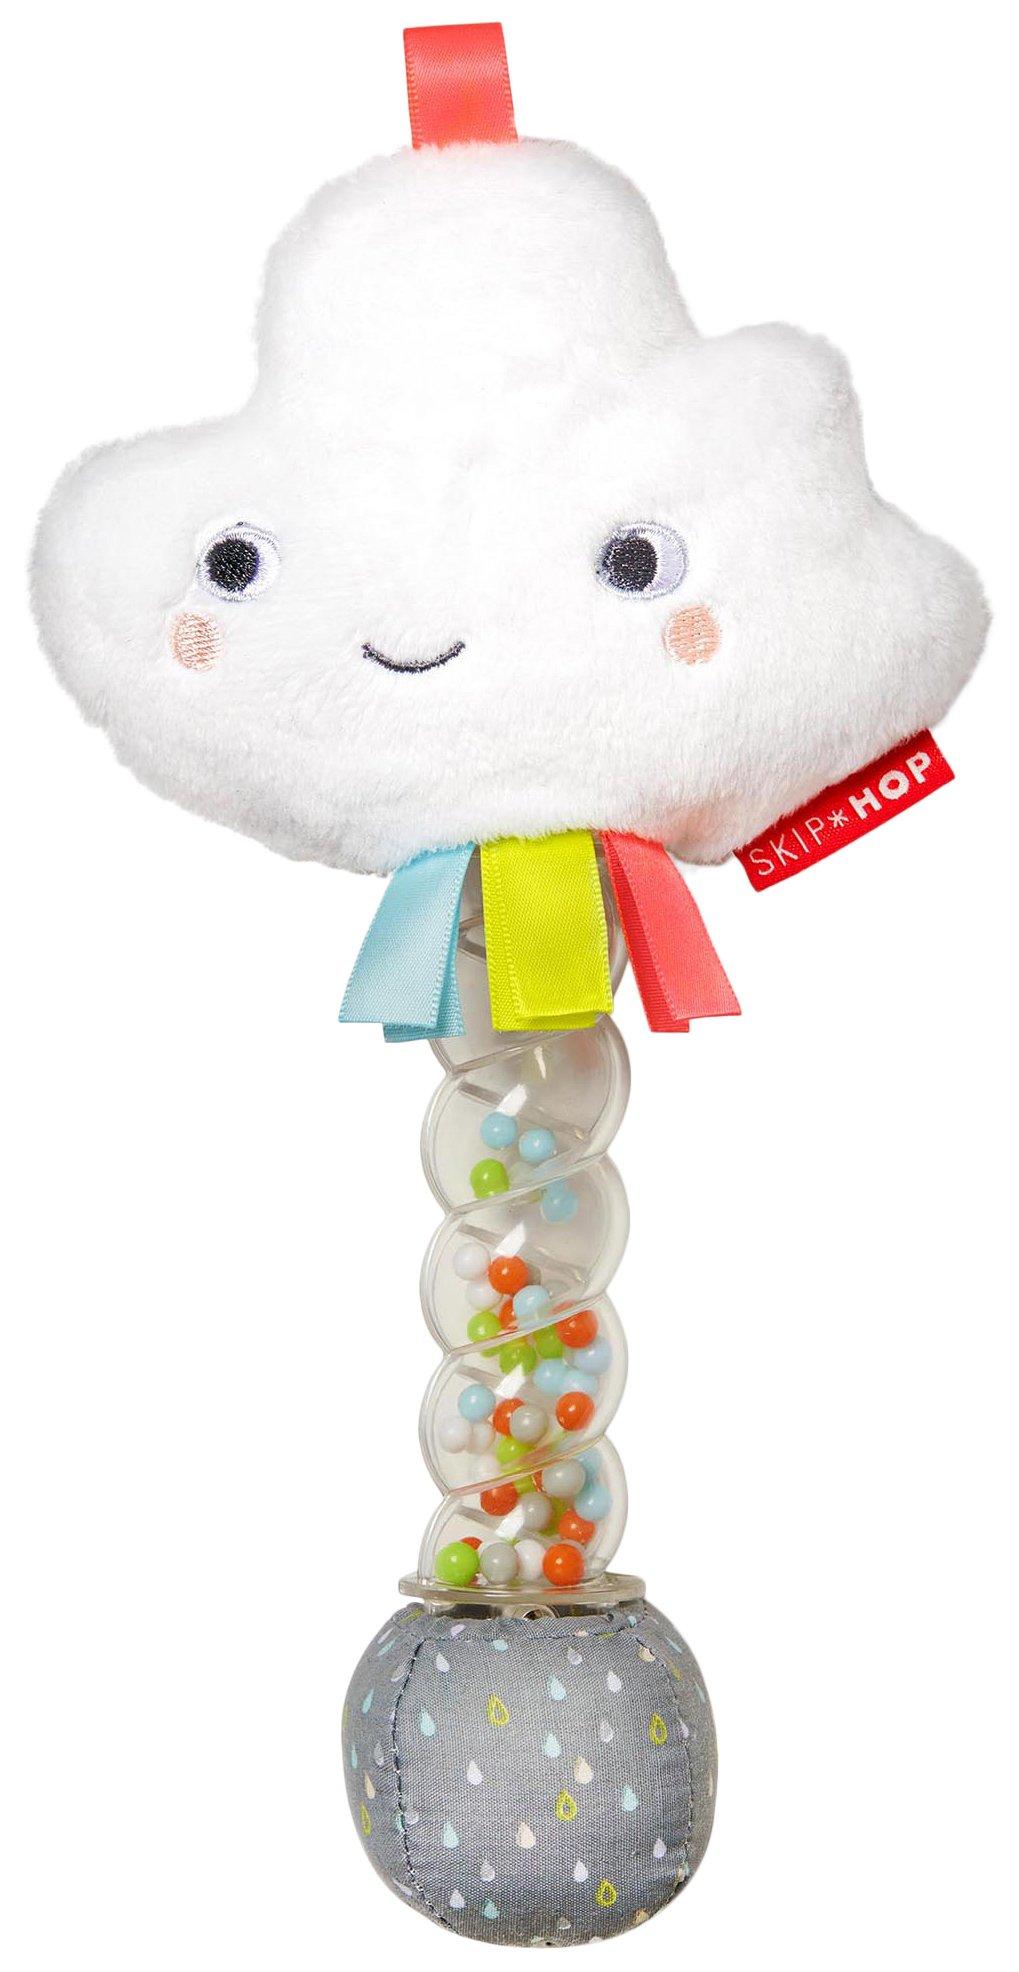 Baby Rattle -  Silver Lining Cloud Rainstick